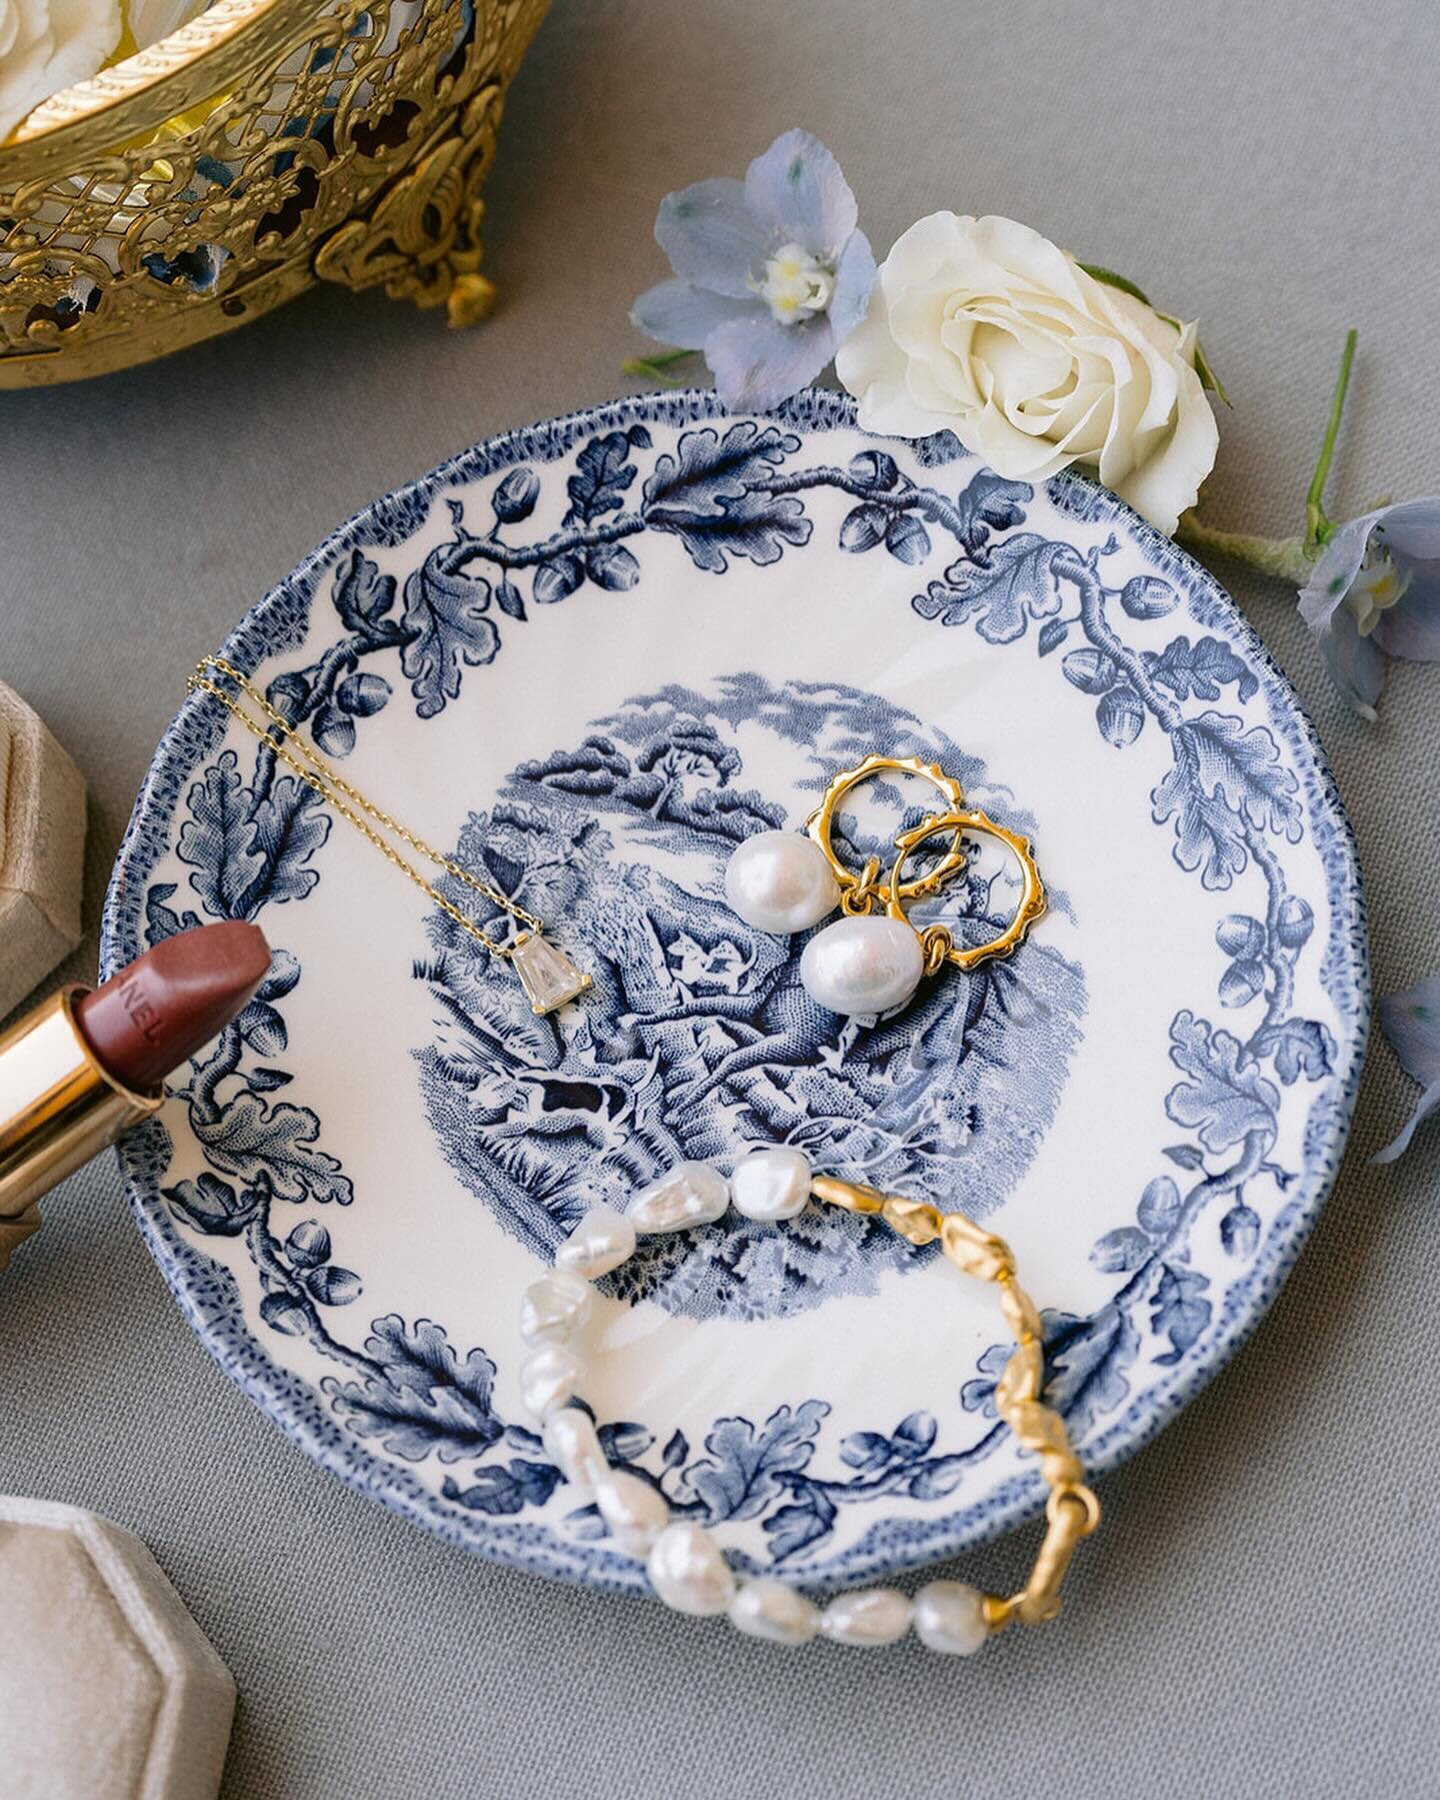 Nothing brings out the look of a vintage Temecula Creek wedding, like some vintage blue European style plates and glasses! 🩵💙🤍

Couple: @_meganhale_ @lanemellon 
Venue: @tciweddings 
Planner: @lauren_everlybymge @everlybymge 
Florist: @sweetpeaflo